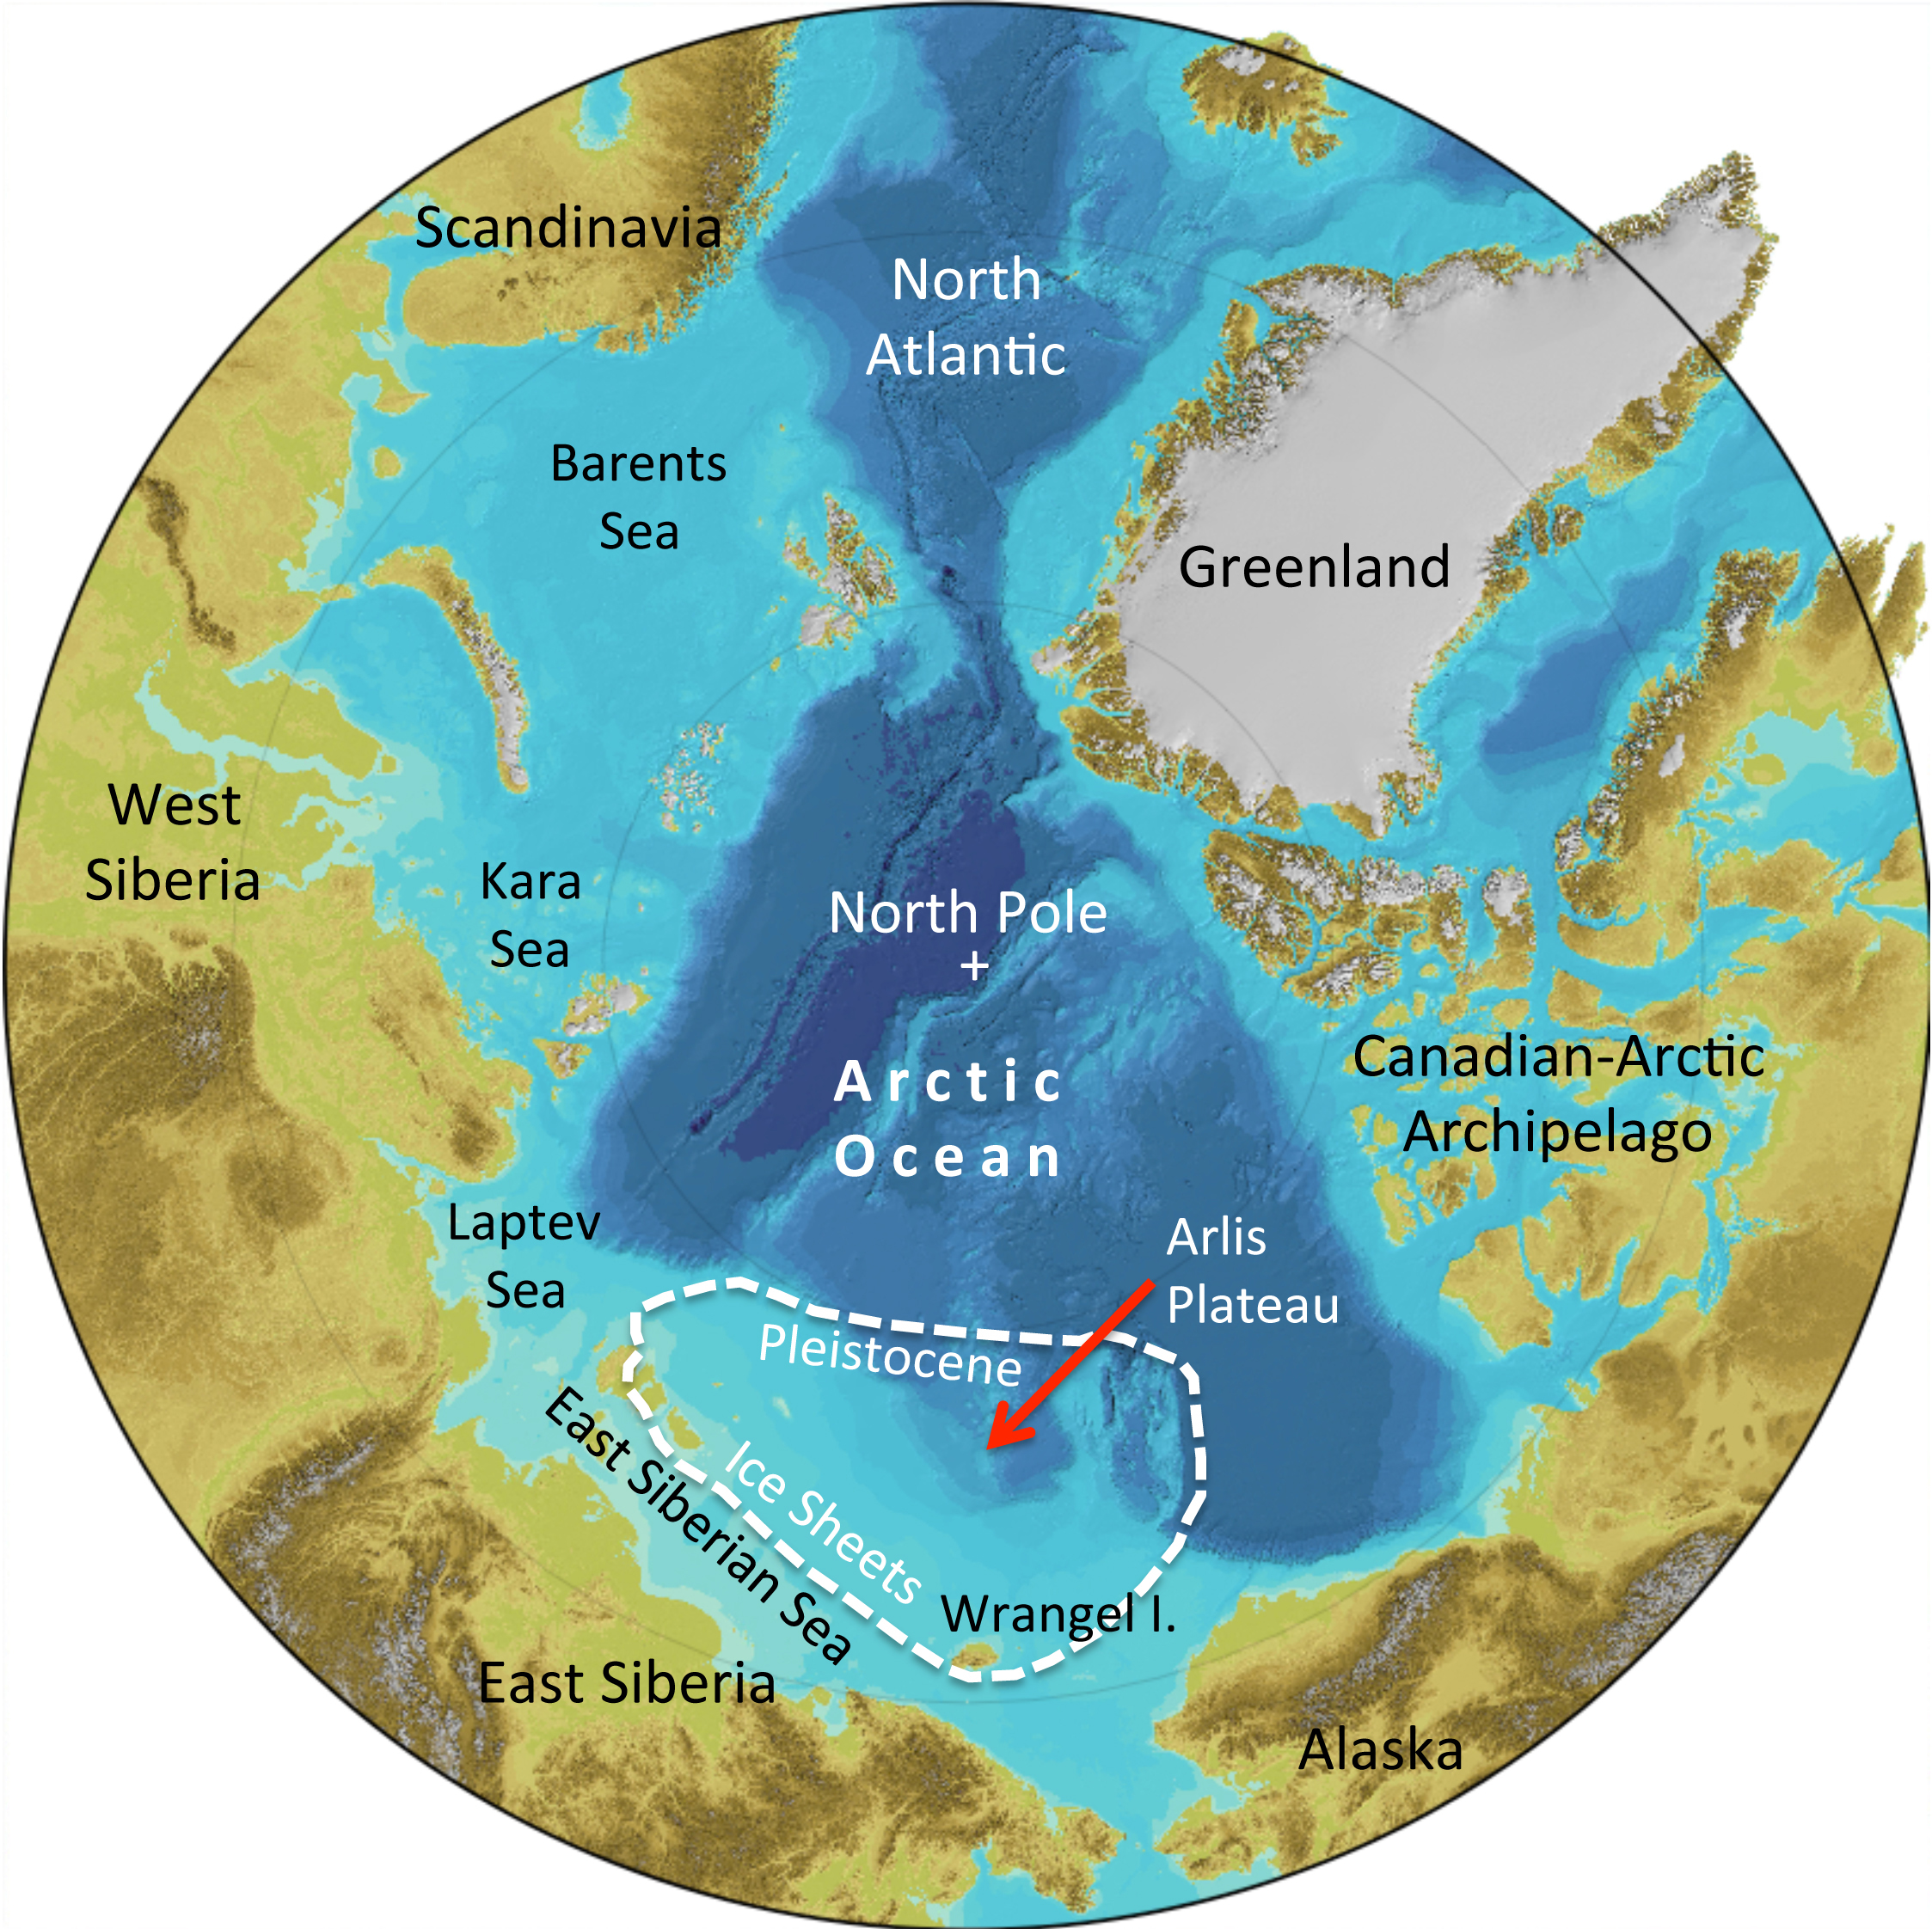 Traces Of Immense Prehistoric Ice Sheets